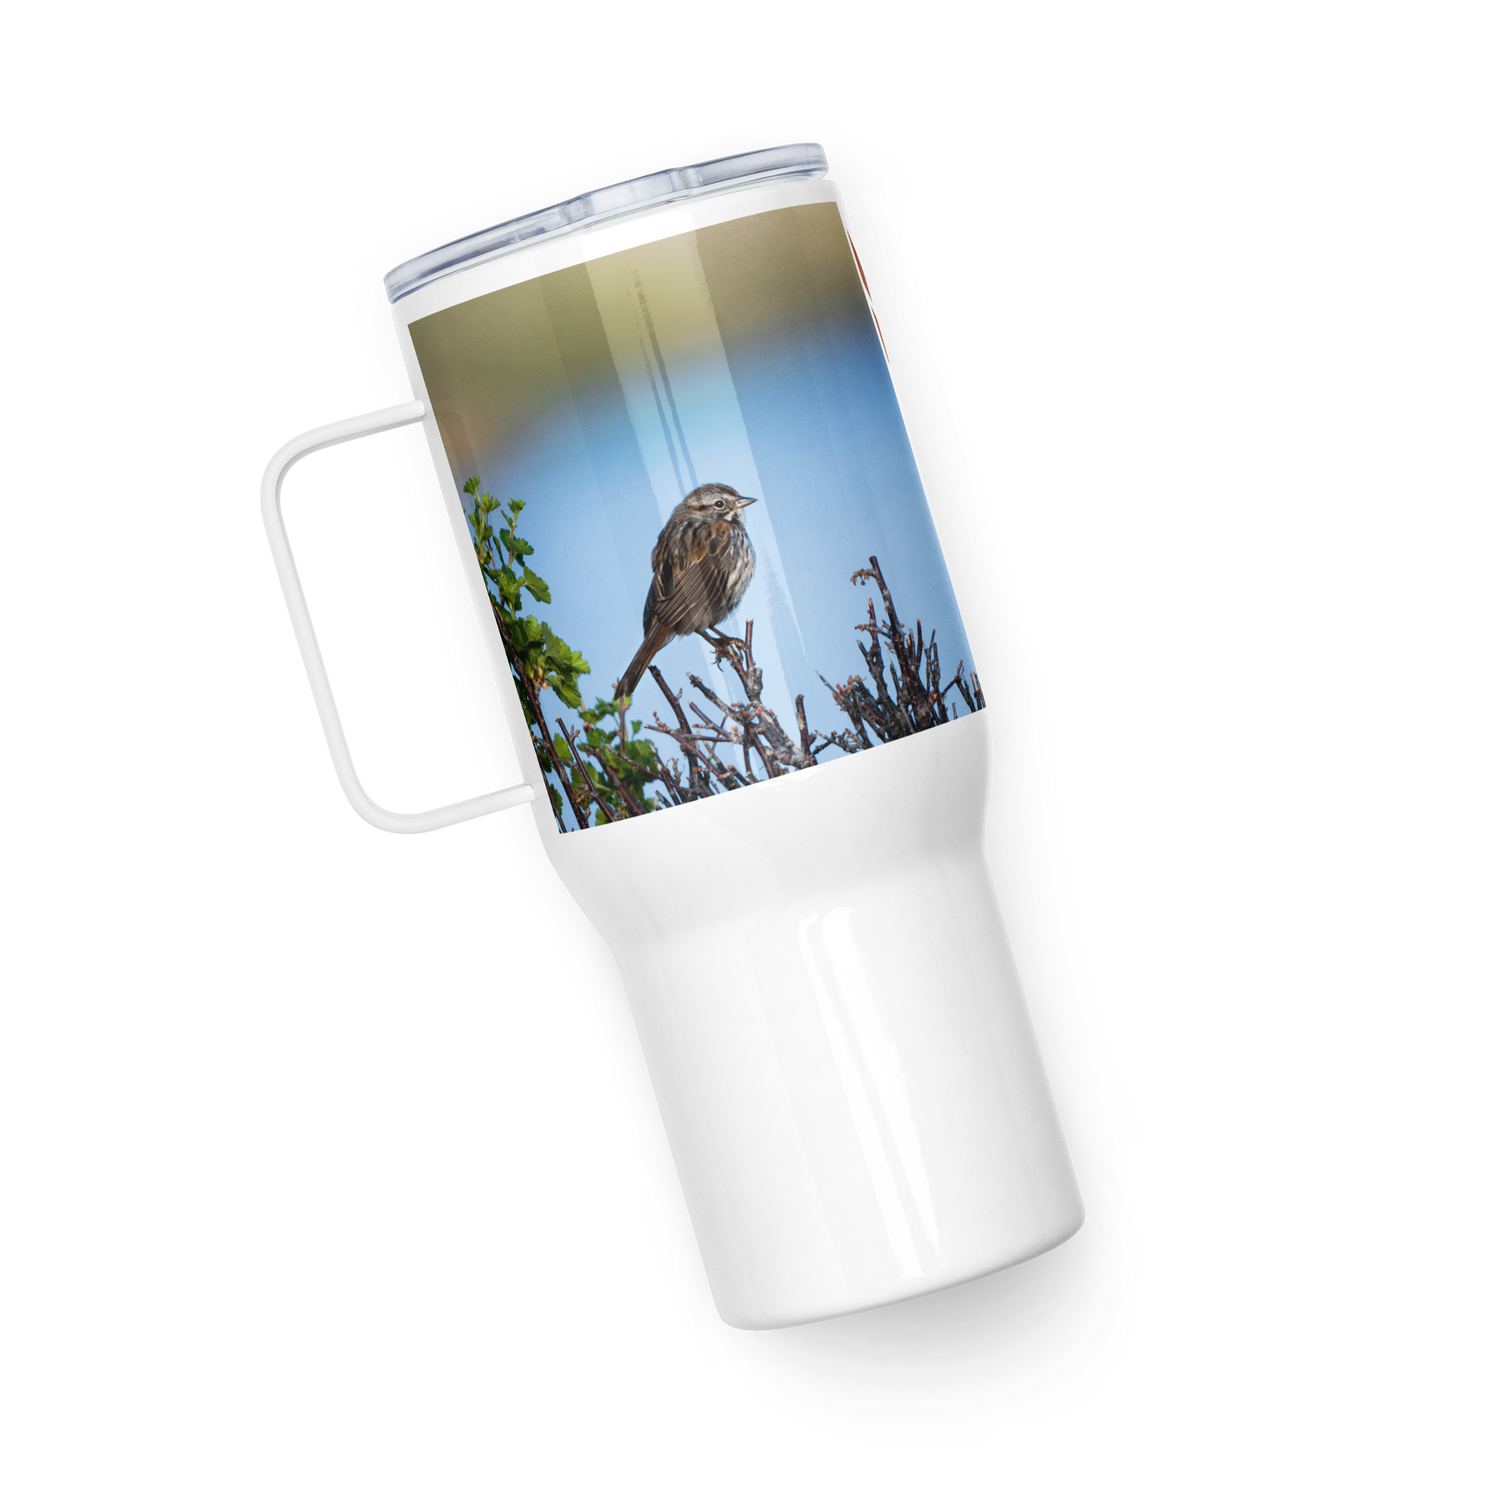 Song Sparrow Travel mug with a handle